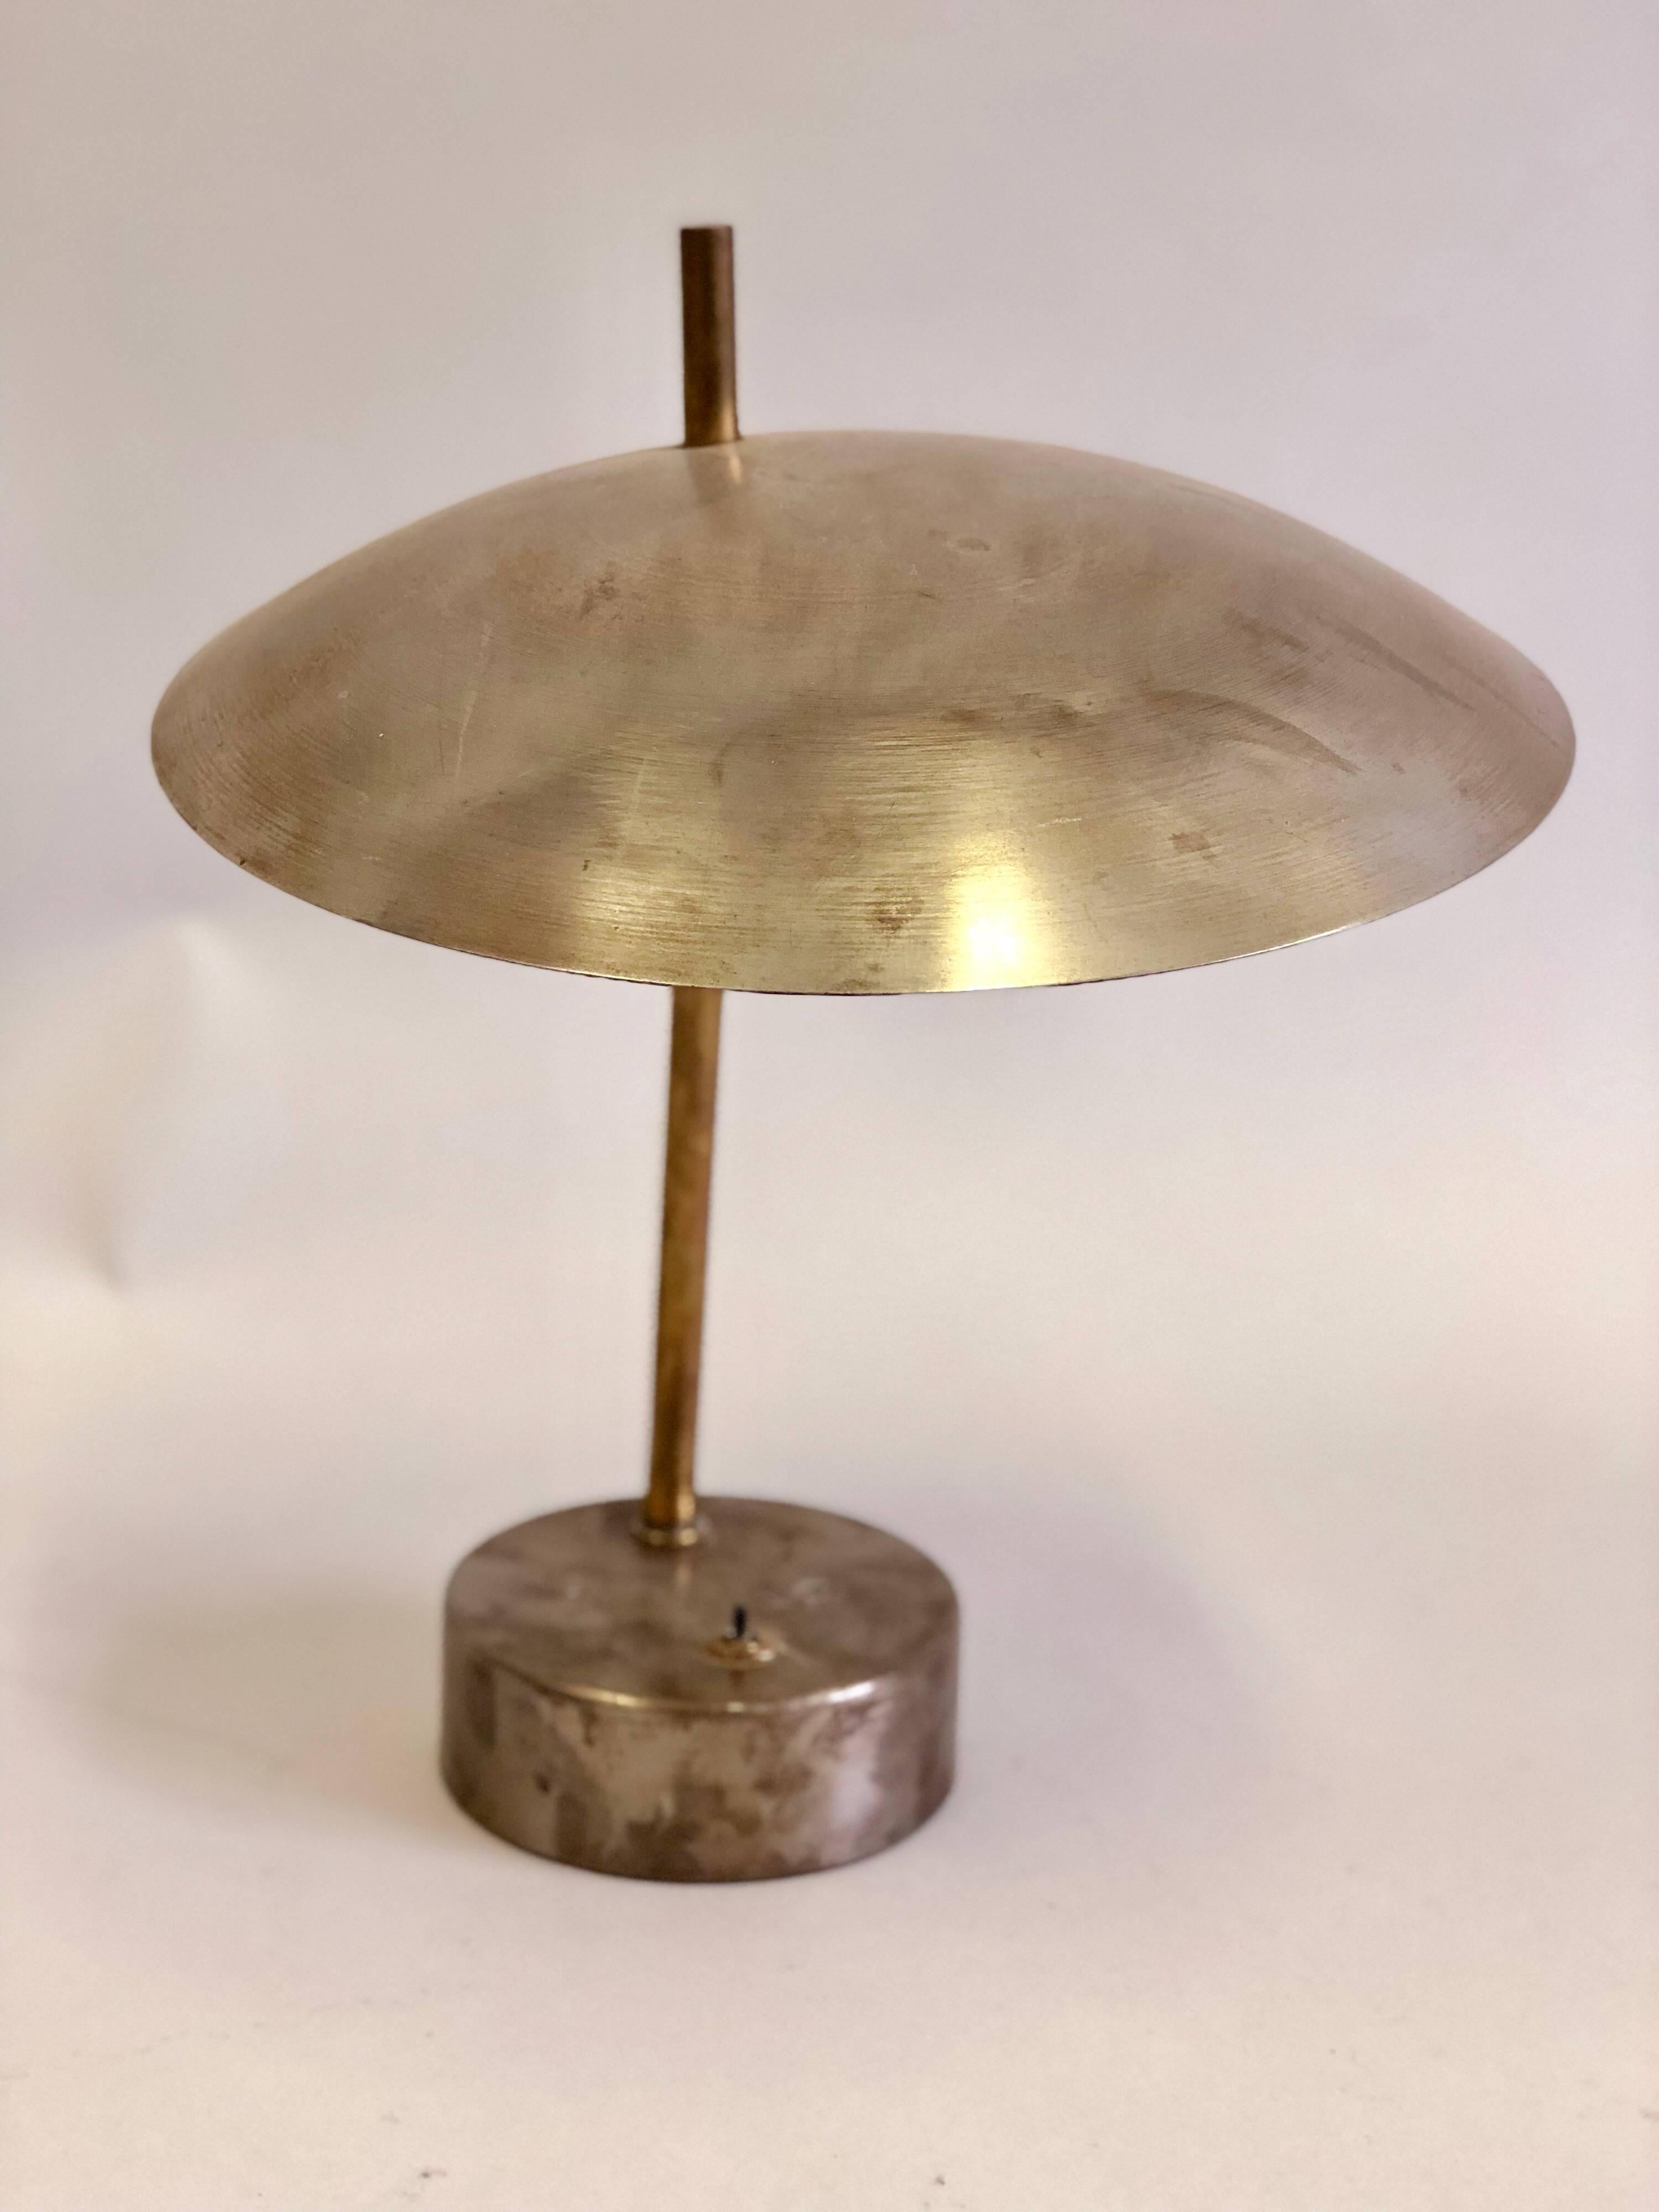 20th Century Pair of Mid-Century Modern Industrial Steel and Brass Desk or Table Lamps, 1950